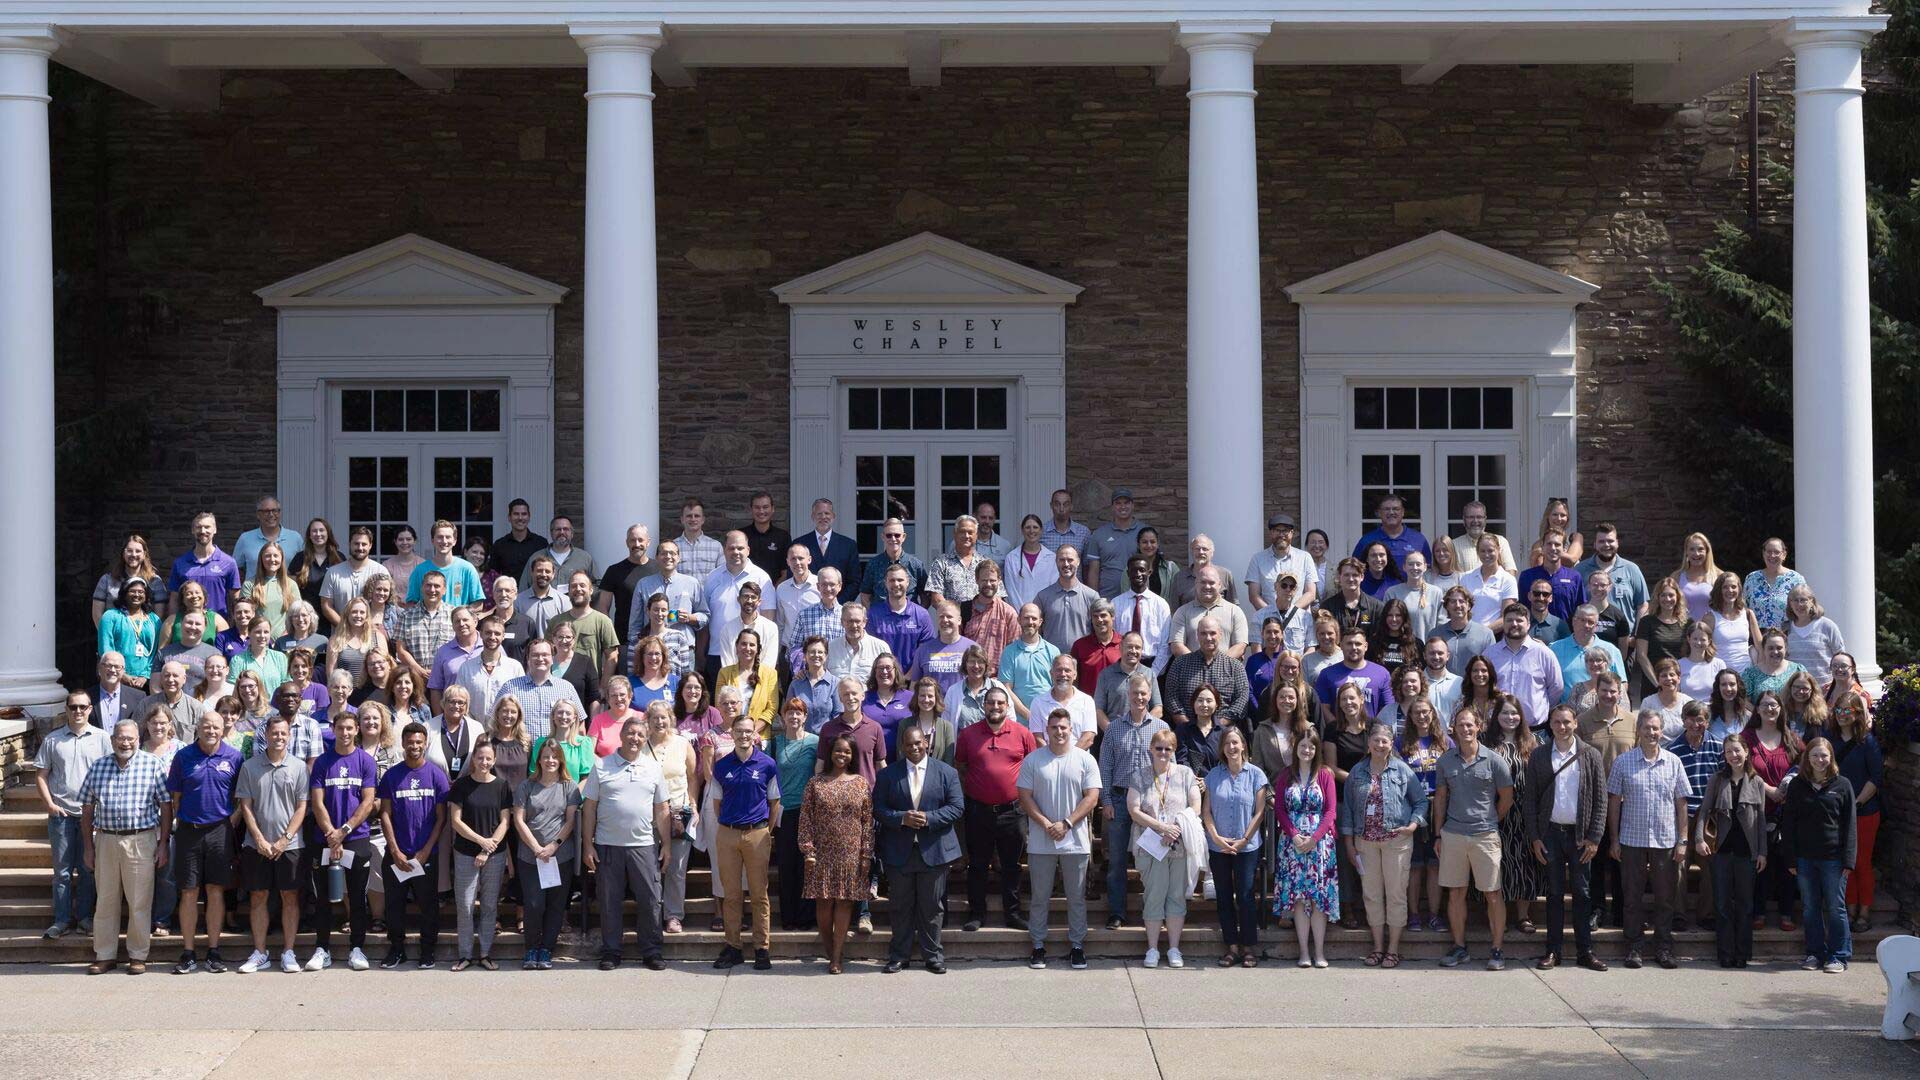 Houghton staff and faculty standing on the steps of the Wesley Chapel.